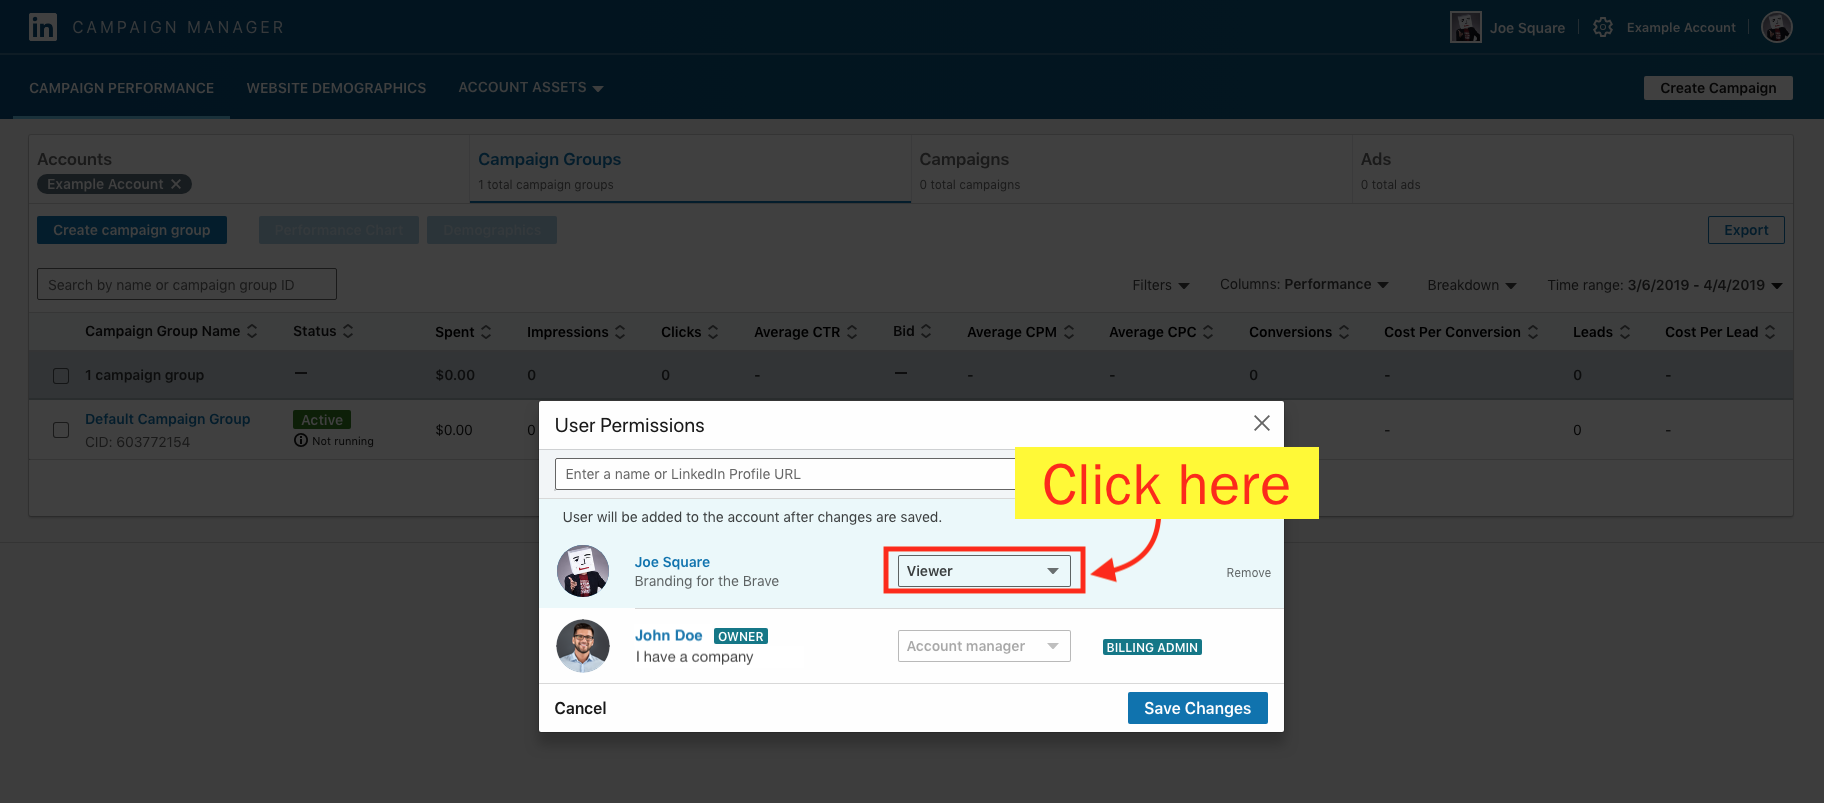 Add a Campaign Manager to Your LinkedIn Ad Account - Step 9 Screenshot